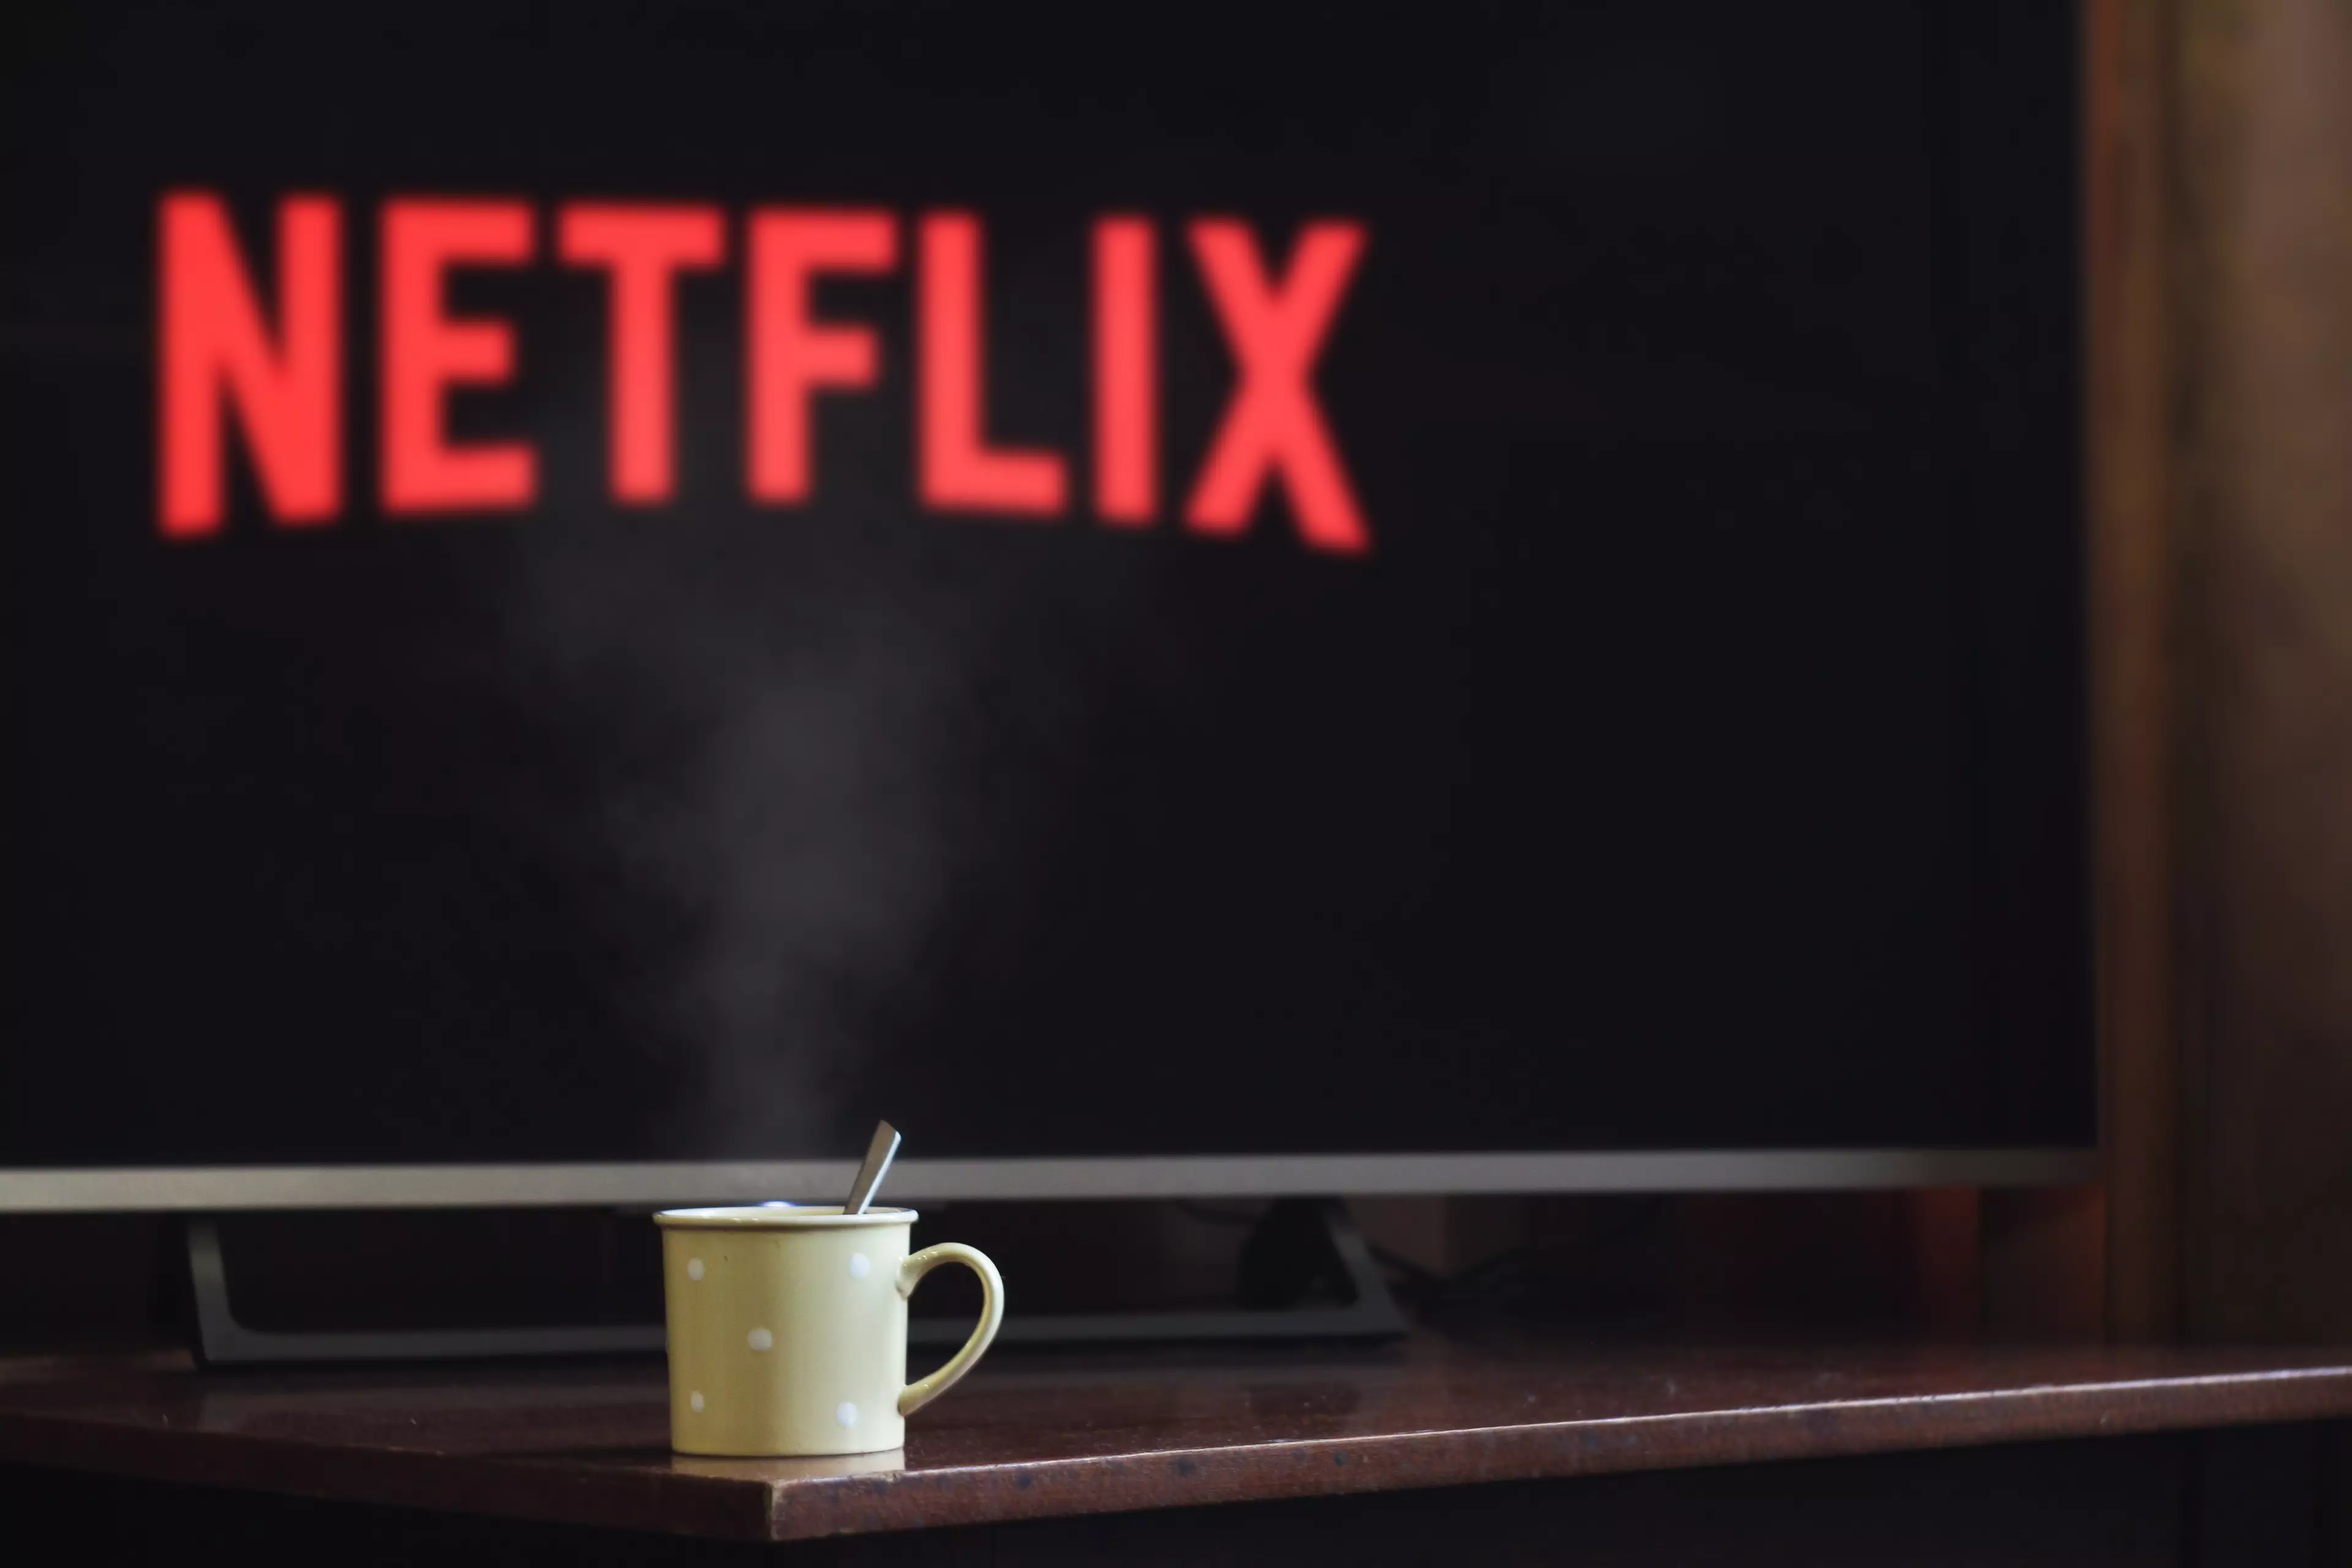 Your Netflix TV binging could soon come to an end (